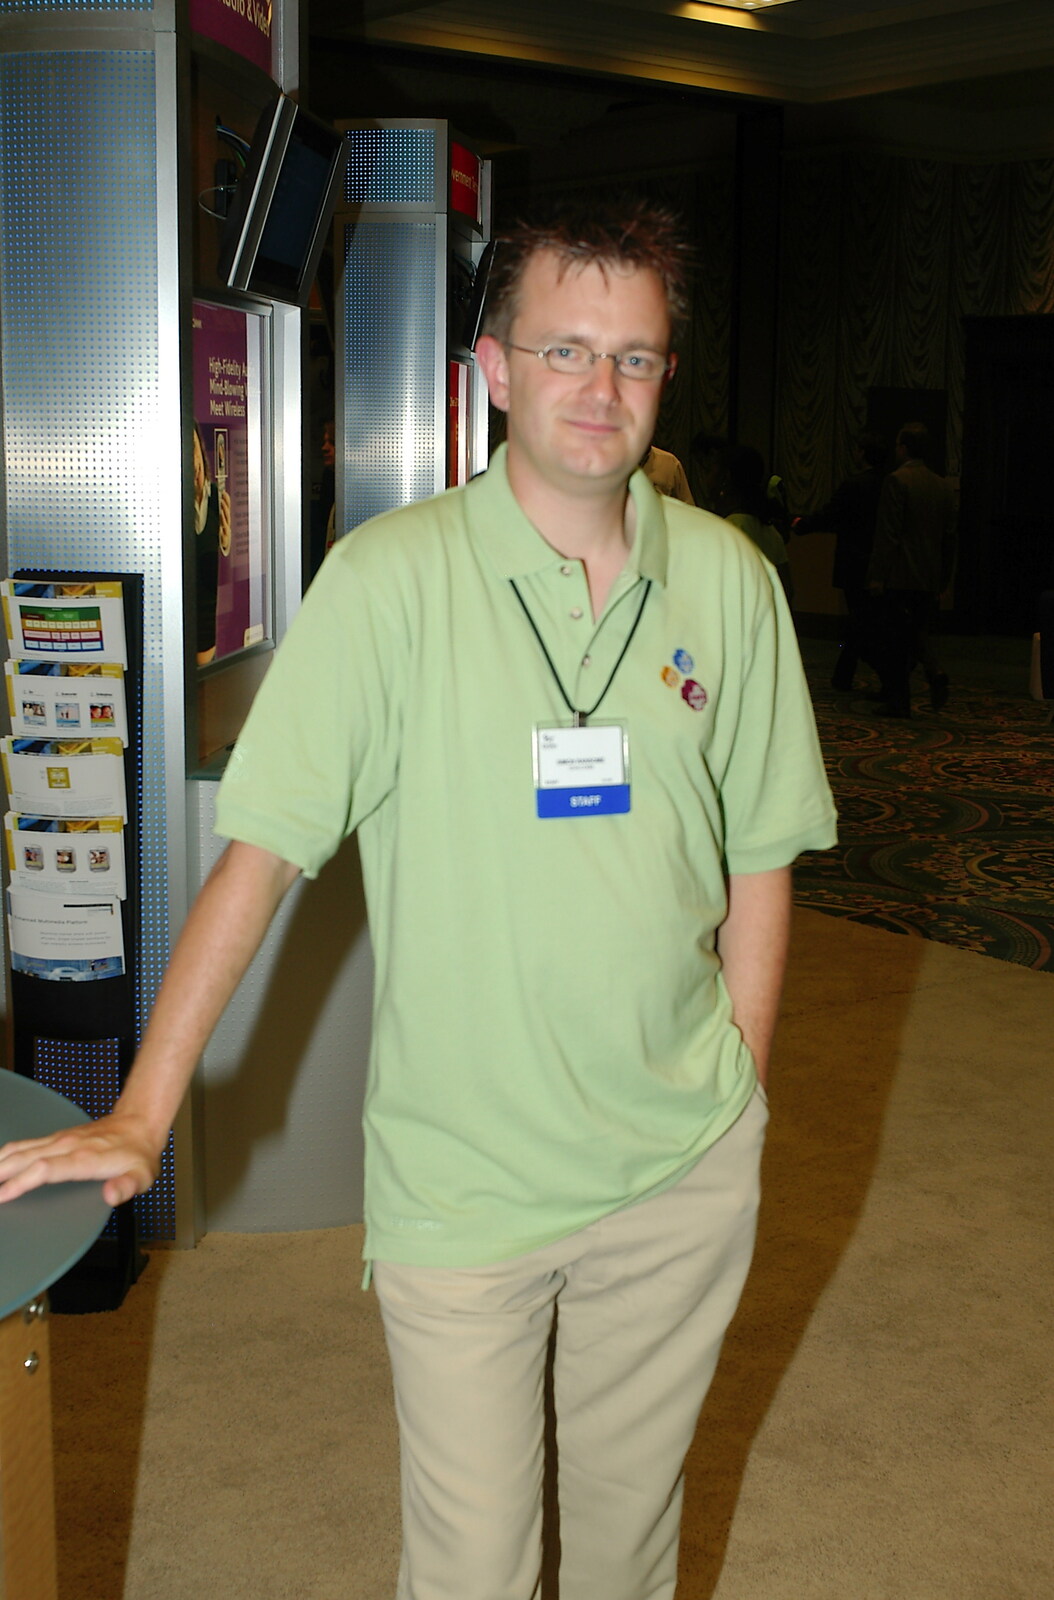 A green polo shirt and regulation 'khaki pants' from The BREW Developers Conference, San Diego, California - 2nd June 2005